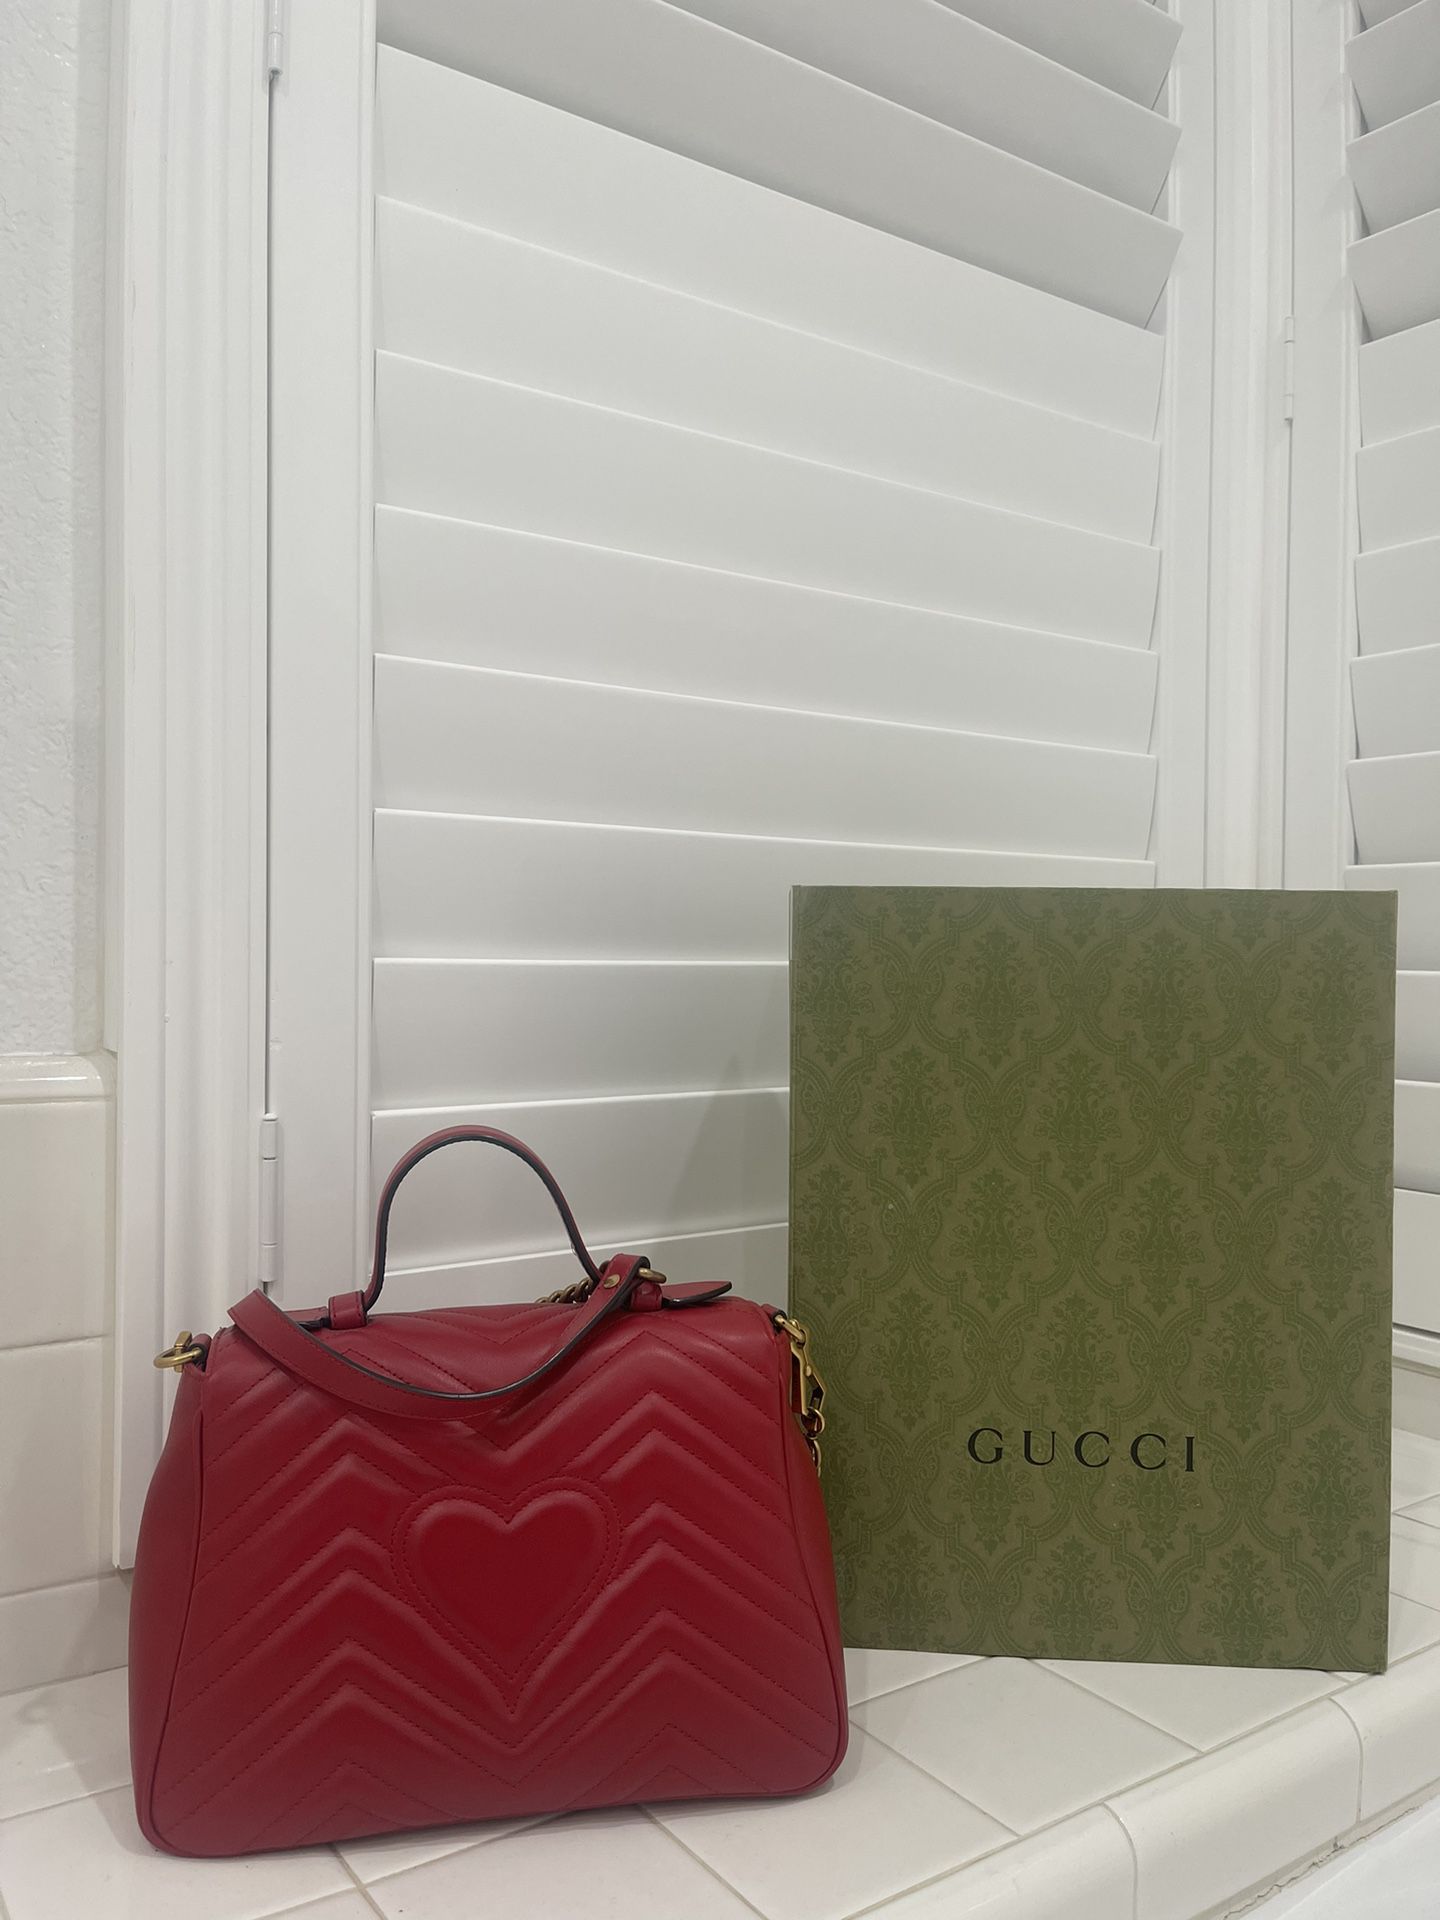 Authentic Gucci Bags 